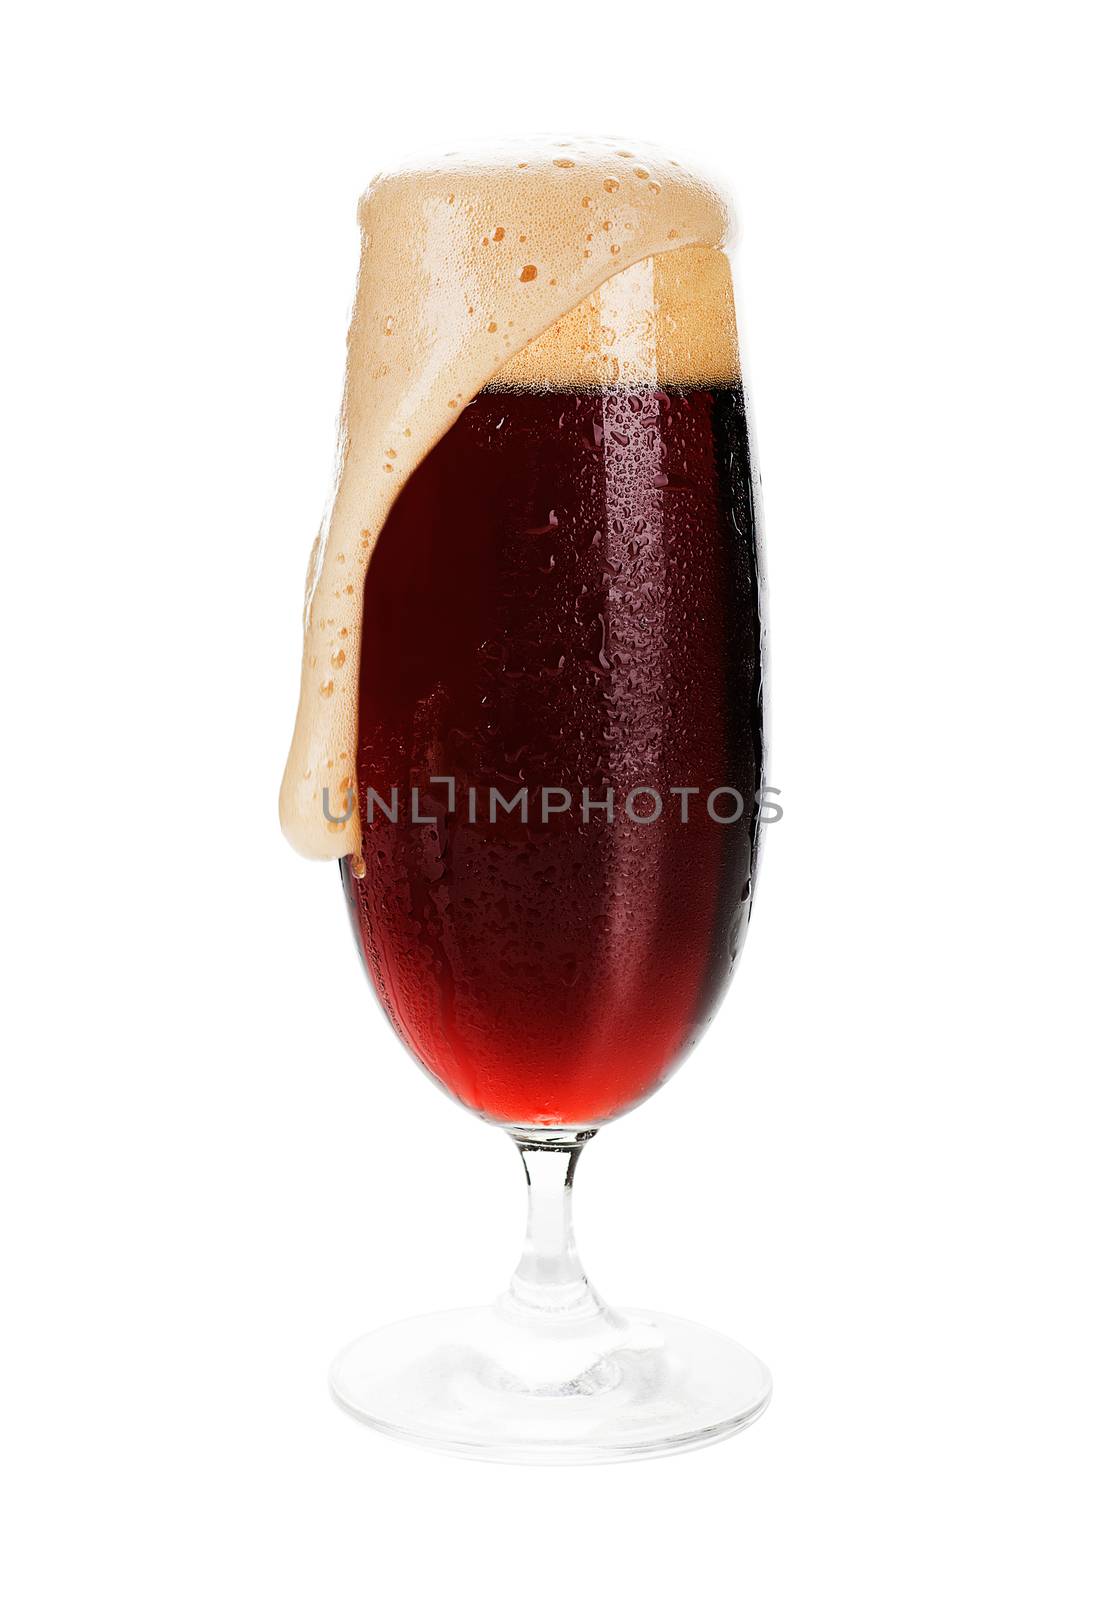 Dark beer. Full cold wet beer glass of dark beer with foam isolated on white.